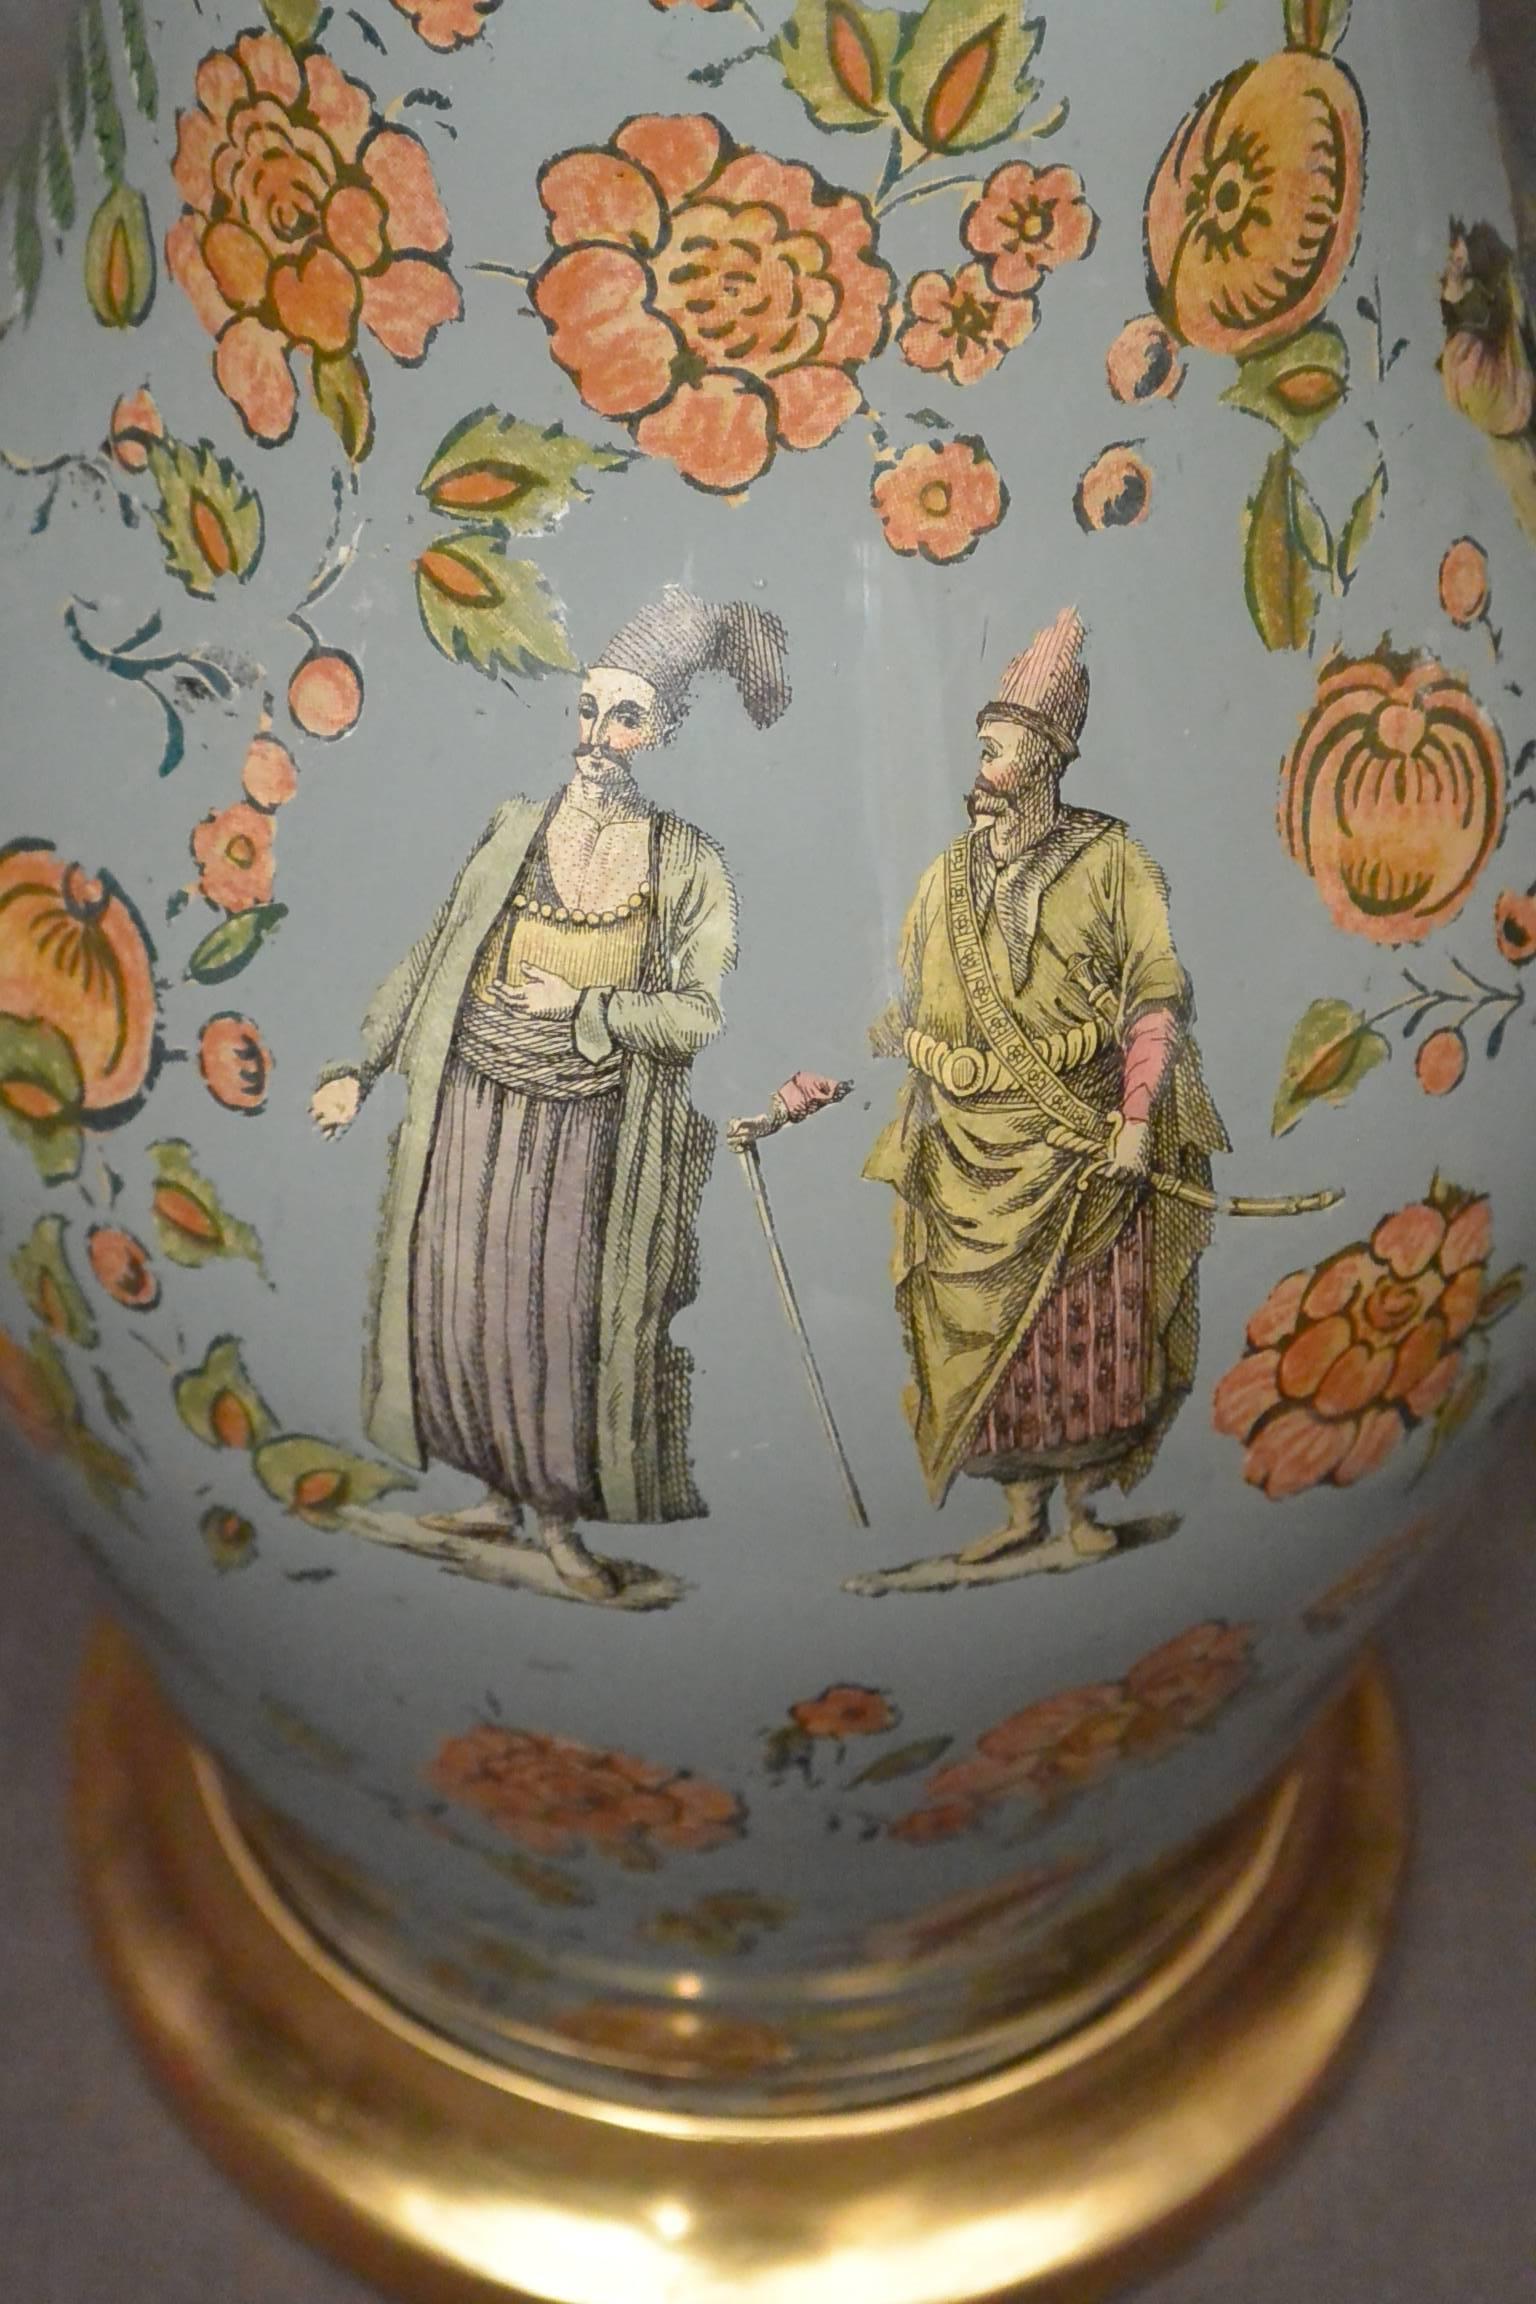 Continental chinoiserie decalcomania lamp. Continental chinoiserie decalcomania lamp on water-gilt base with Turkish court figures, Chinese figures in landscapes with scattered flowers and other chinoiserie elements on a blue painted ground, with